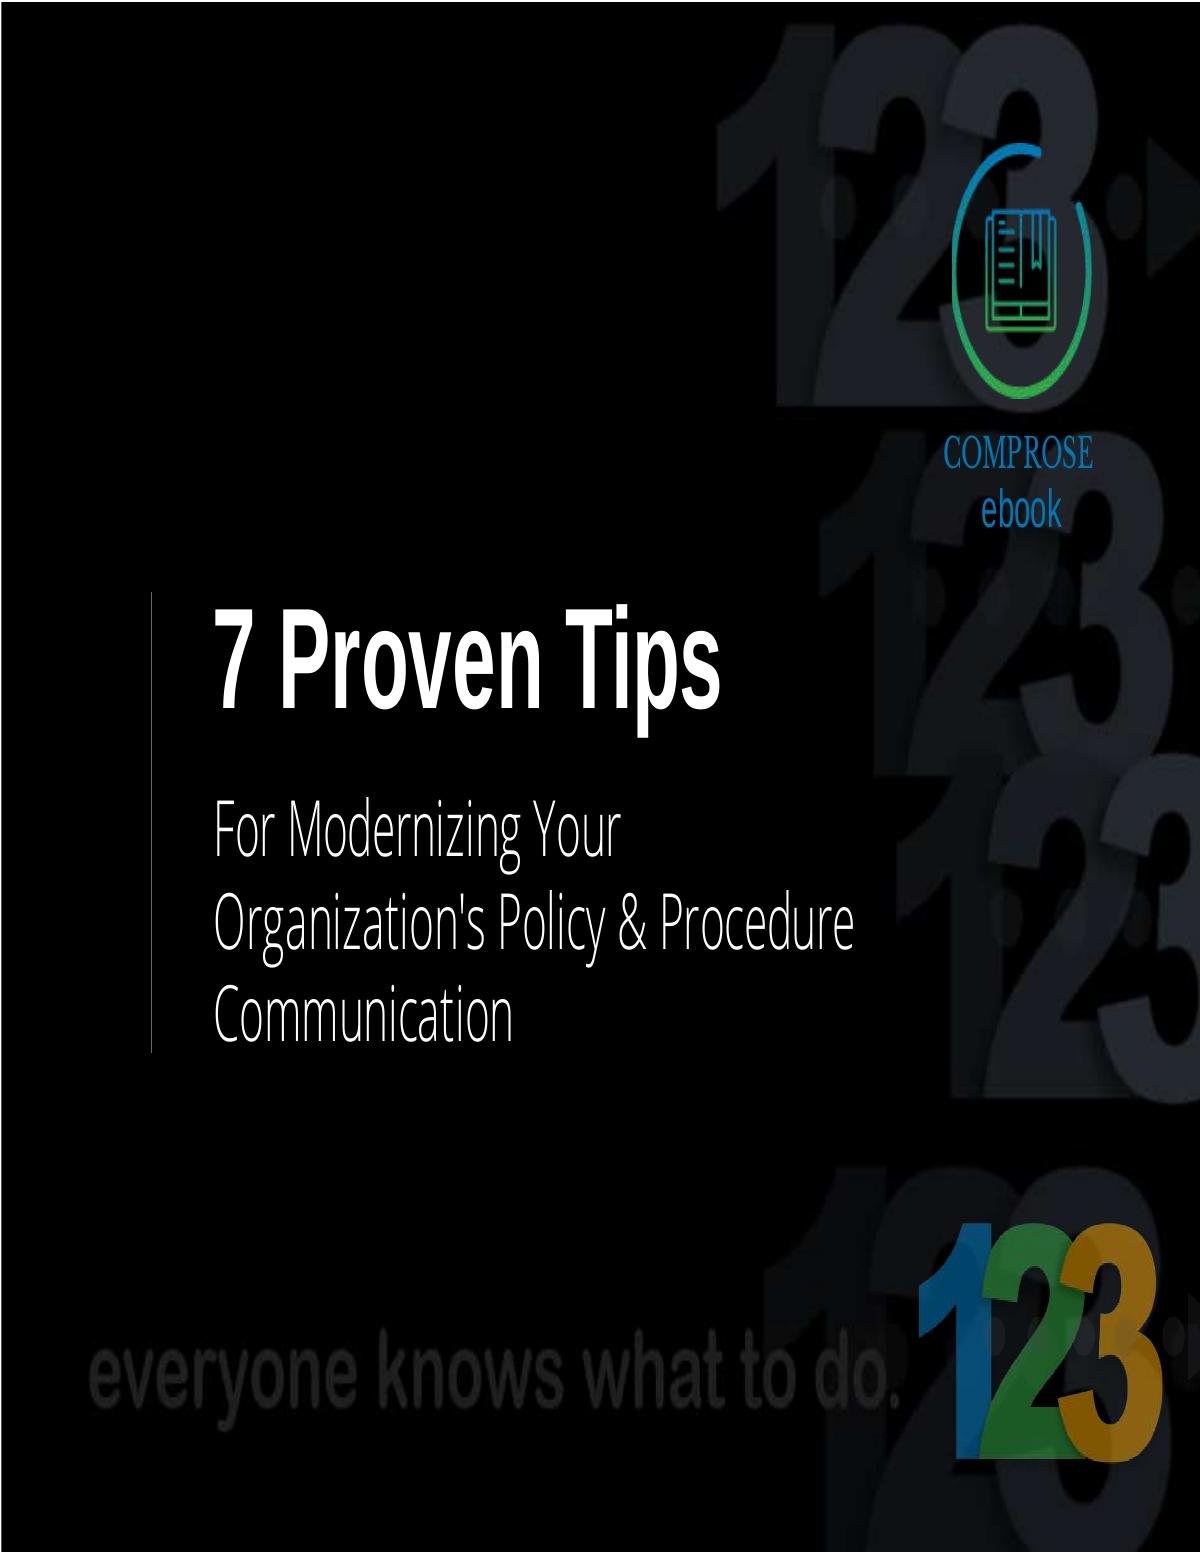 7 Tips for Modernizing Your Organization’s Policy & Procedure Communication